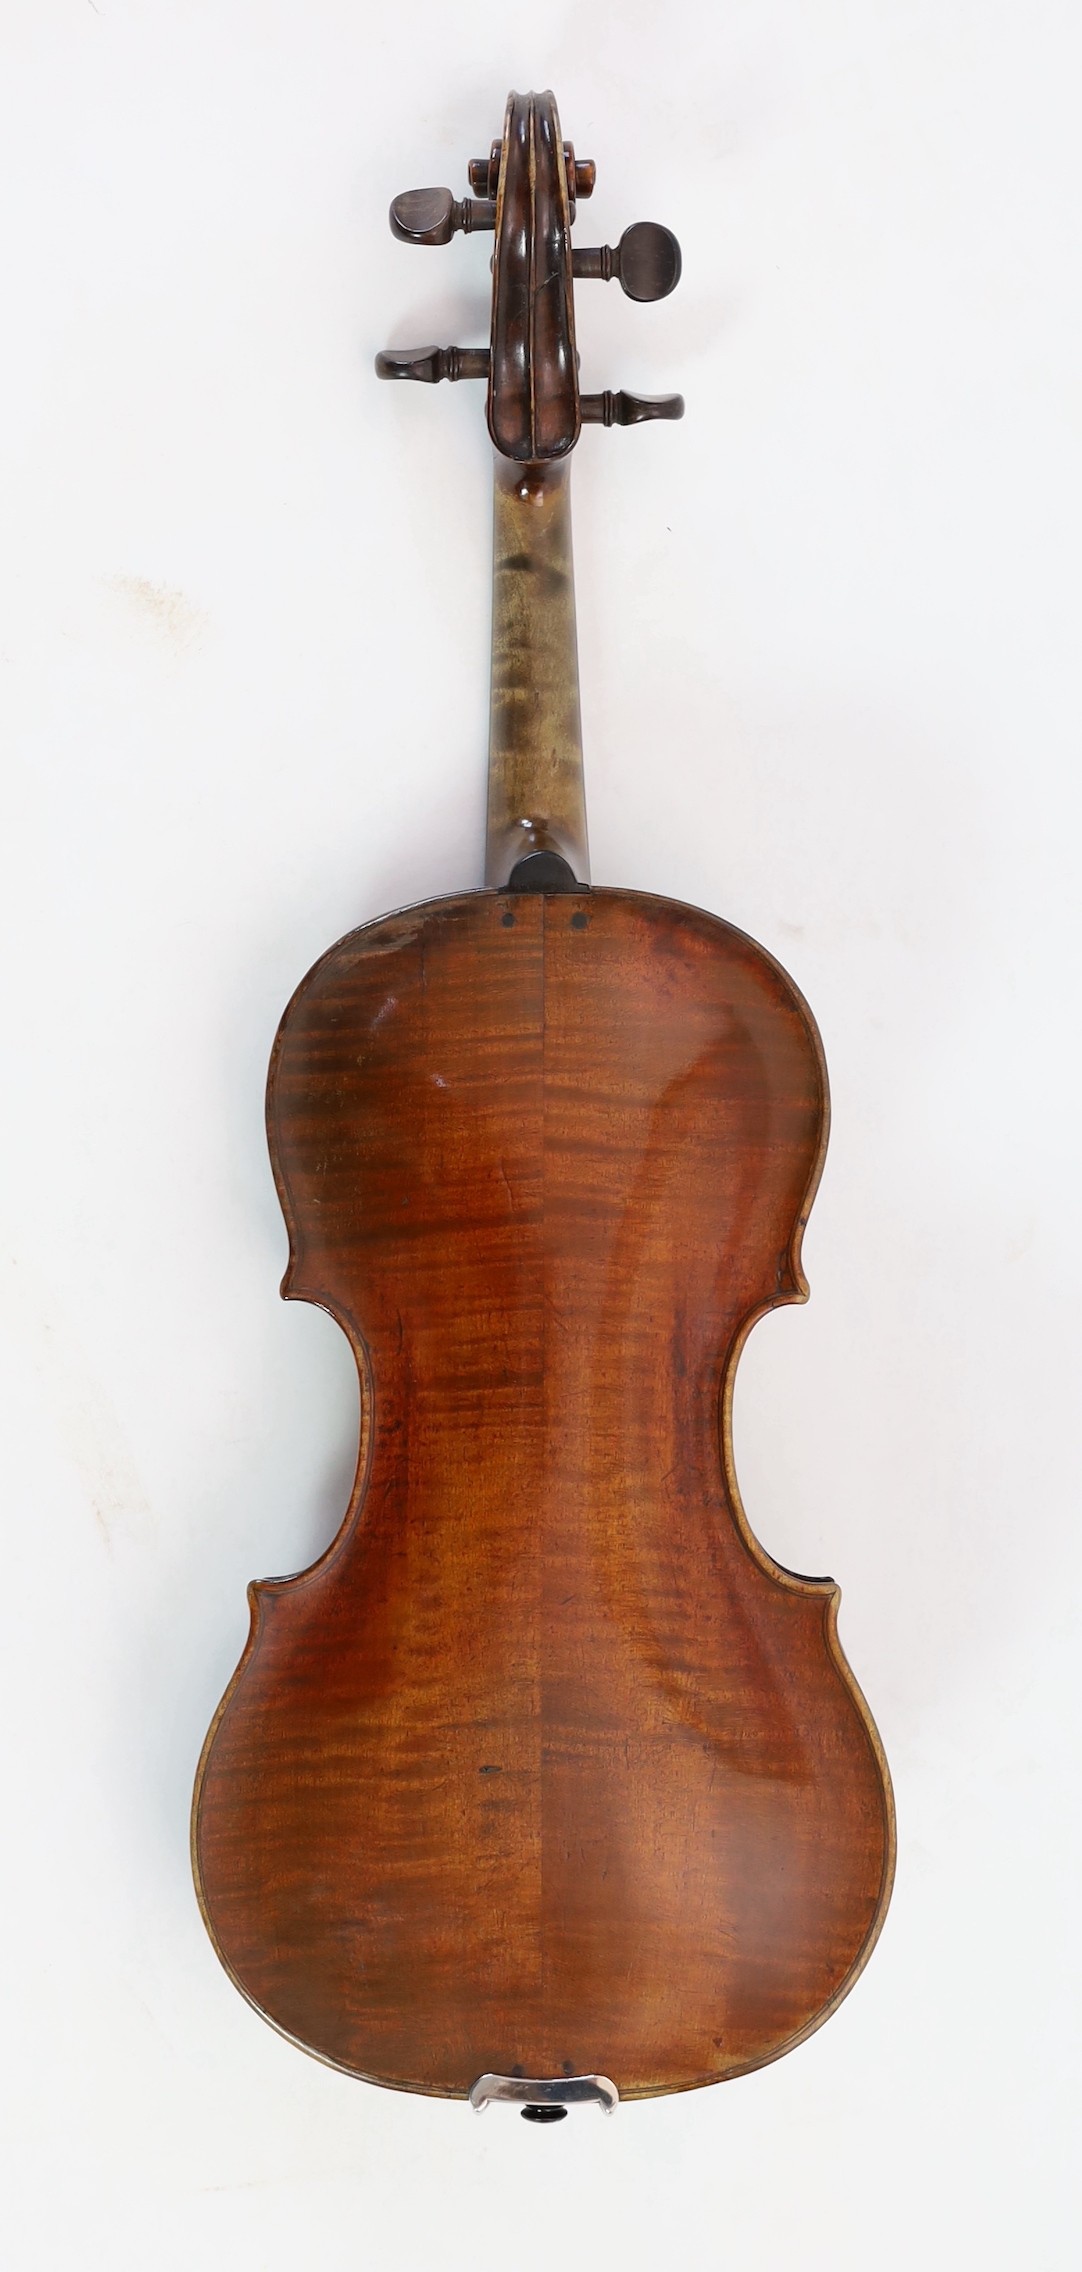 A 19th century violin attributed to Klotz school, length of back 35.5 cm